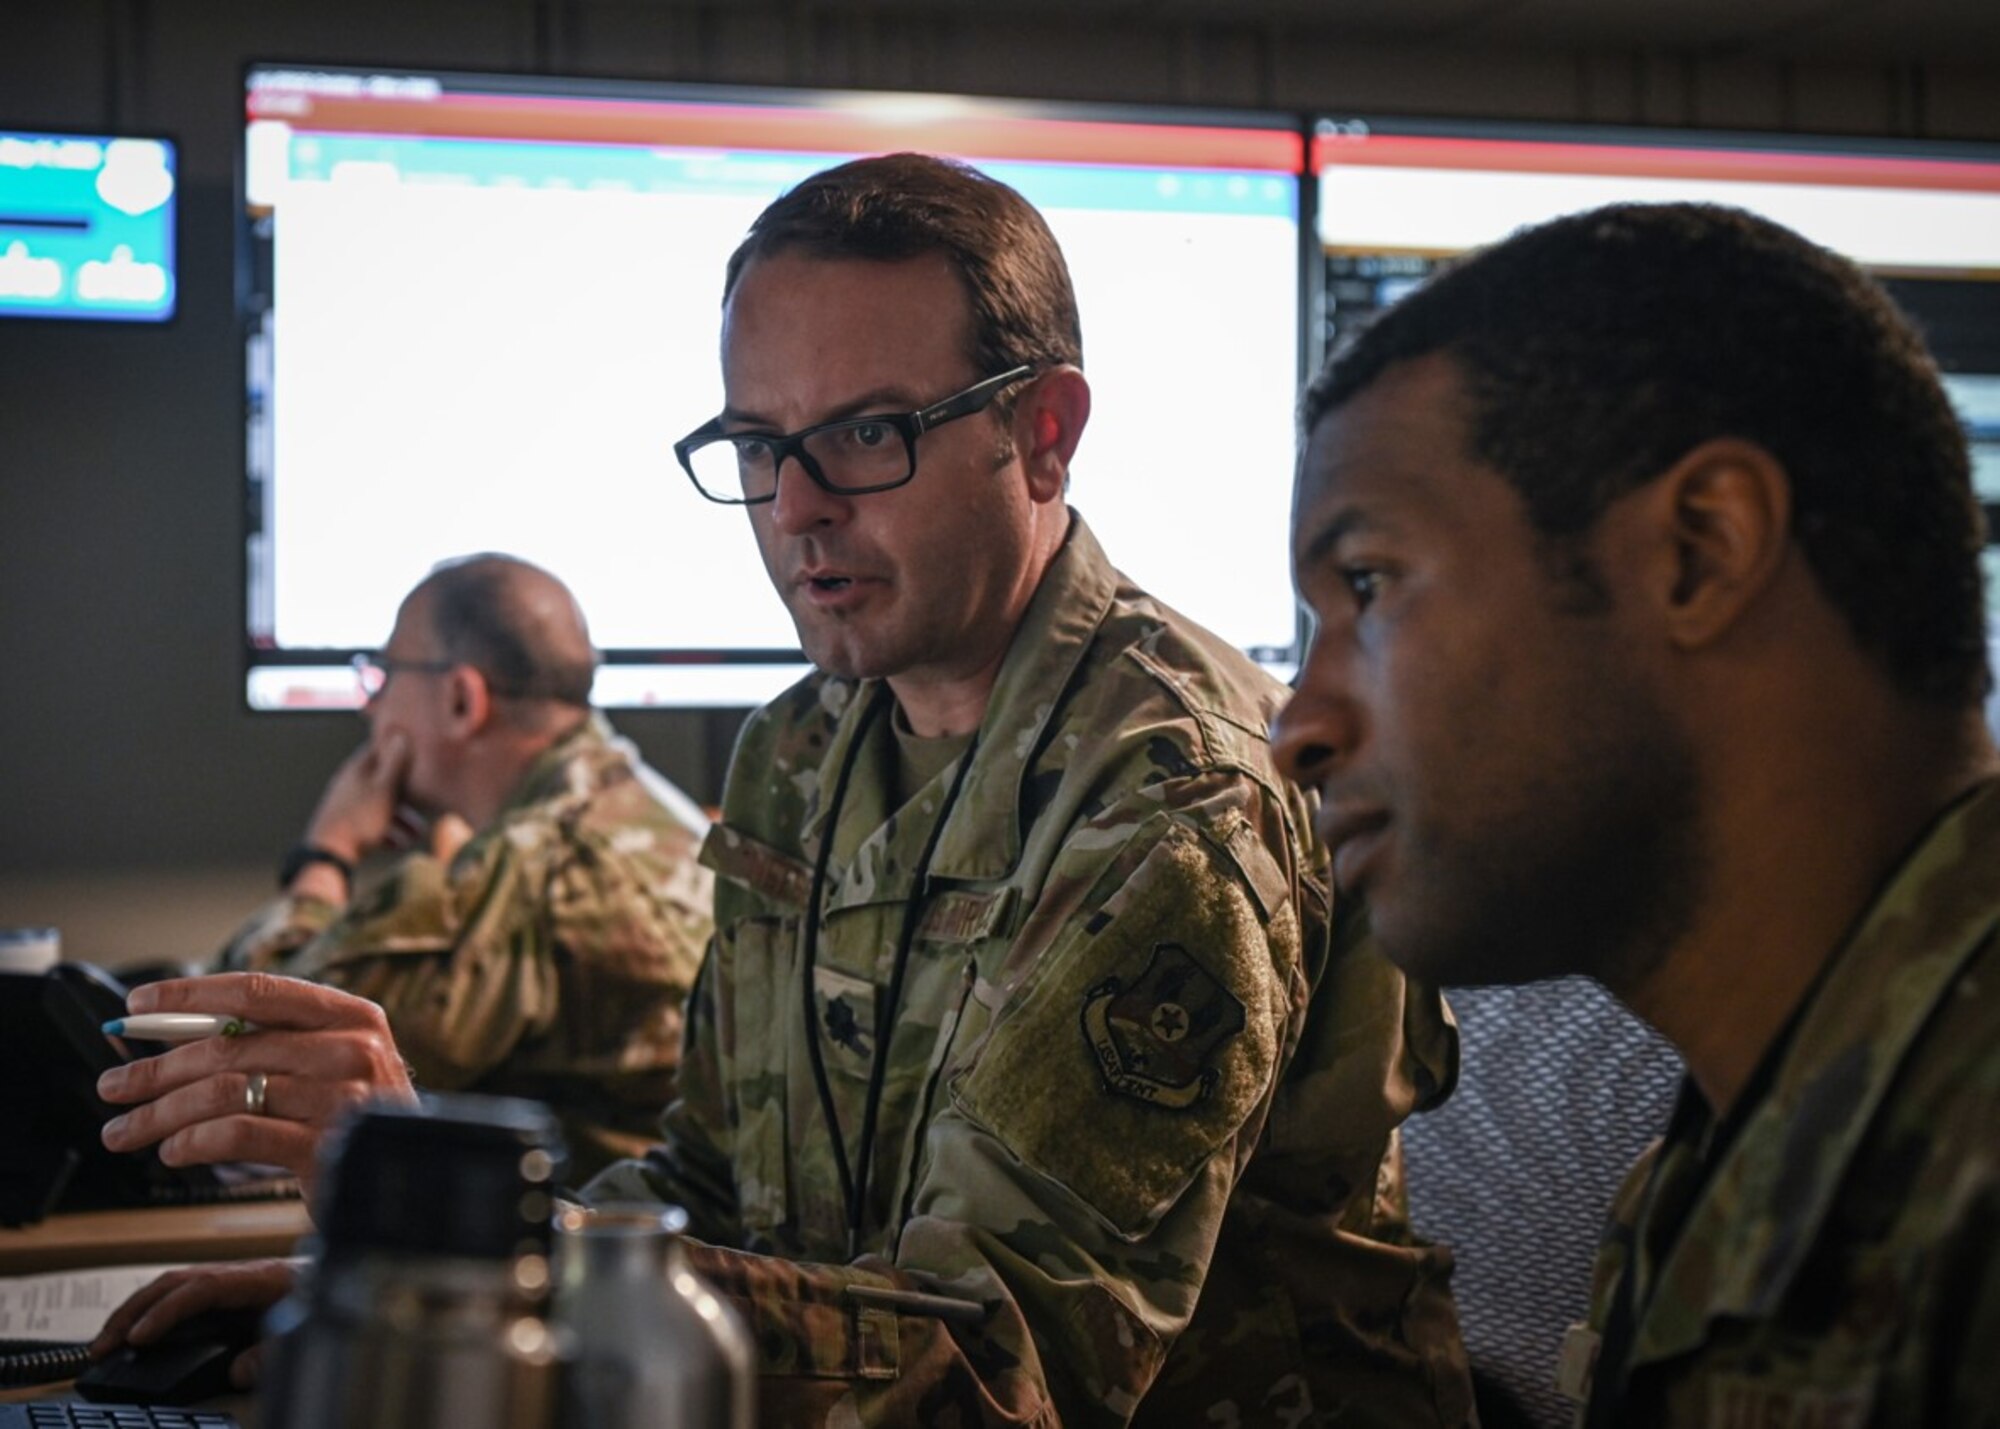 U.S. Air Force Lt. Col. Jay Neese, left, and Maj. William Keuchler, Ninth Air Force (Air Forces Central) Exercise Crisis Action Team deputy directors, review exercise procedures during an Air and Missile Defense Exercise at Shaw Air Force Base, South Carolina, May 11, 2022. AMDEX is a semi-annual exercise that develops and fortifies procedures against simulated air and missile threats in addition to strengthening dispersed operations capabilities. (U.S. Air Force photo by Staff Sgt. Draeke Layman)